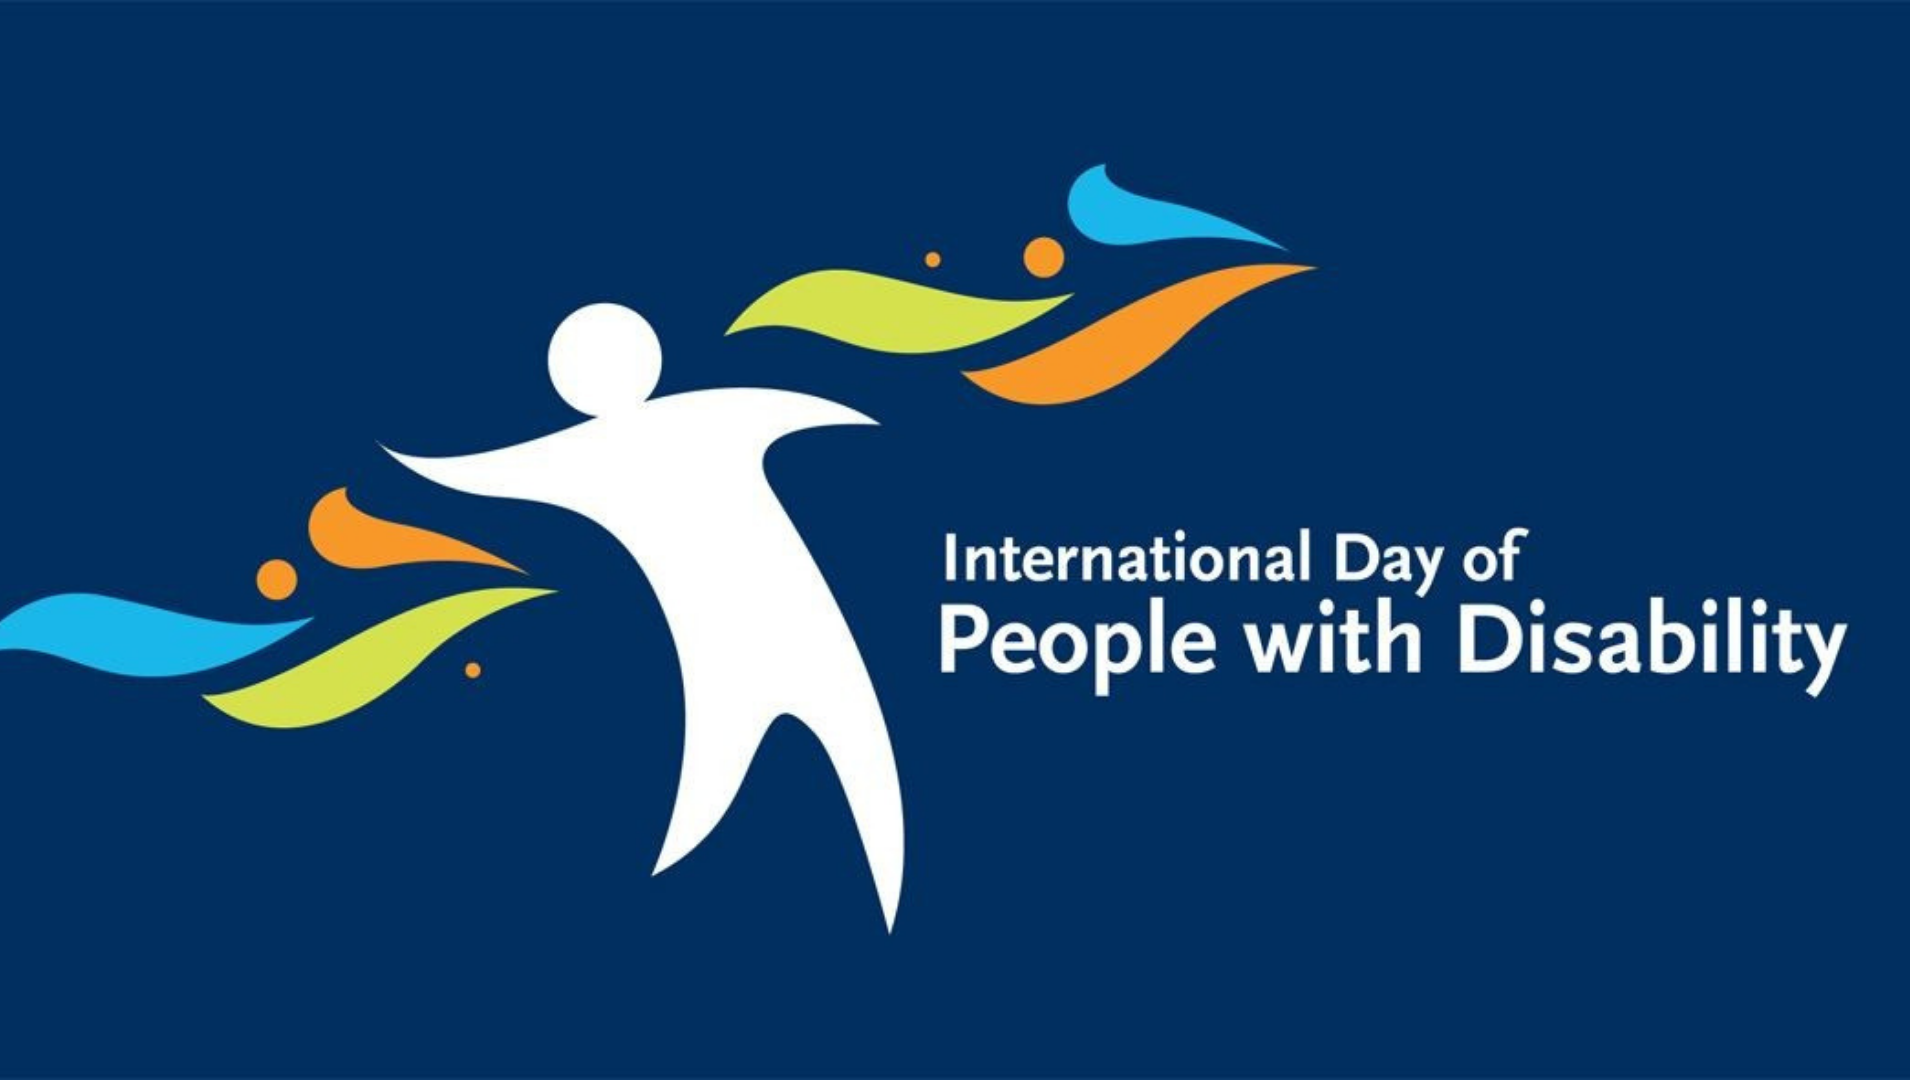 A dark blue background with the logo for IDPWD, showing a white human silhouette with the words "International Day of People with disability" next to it